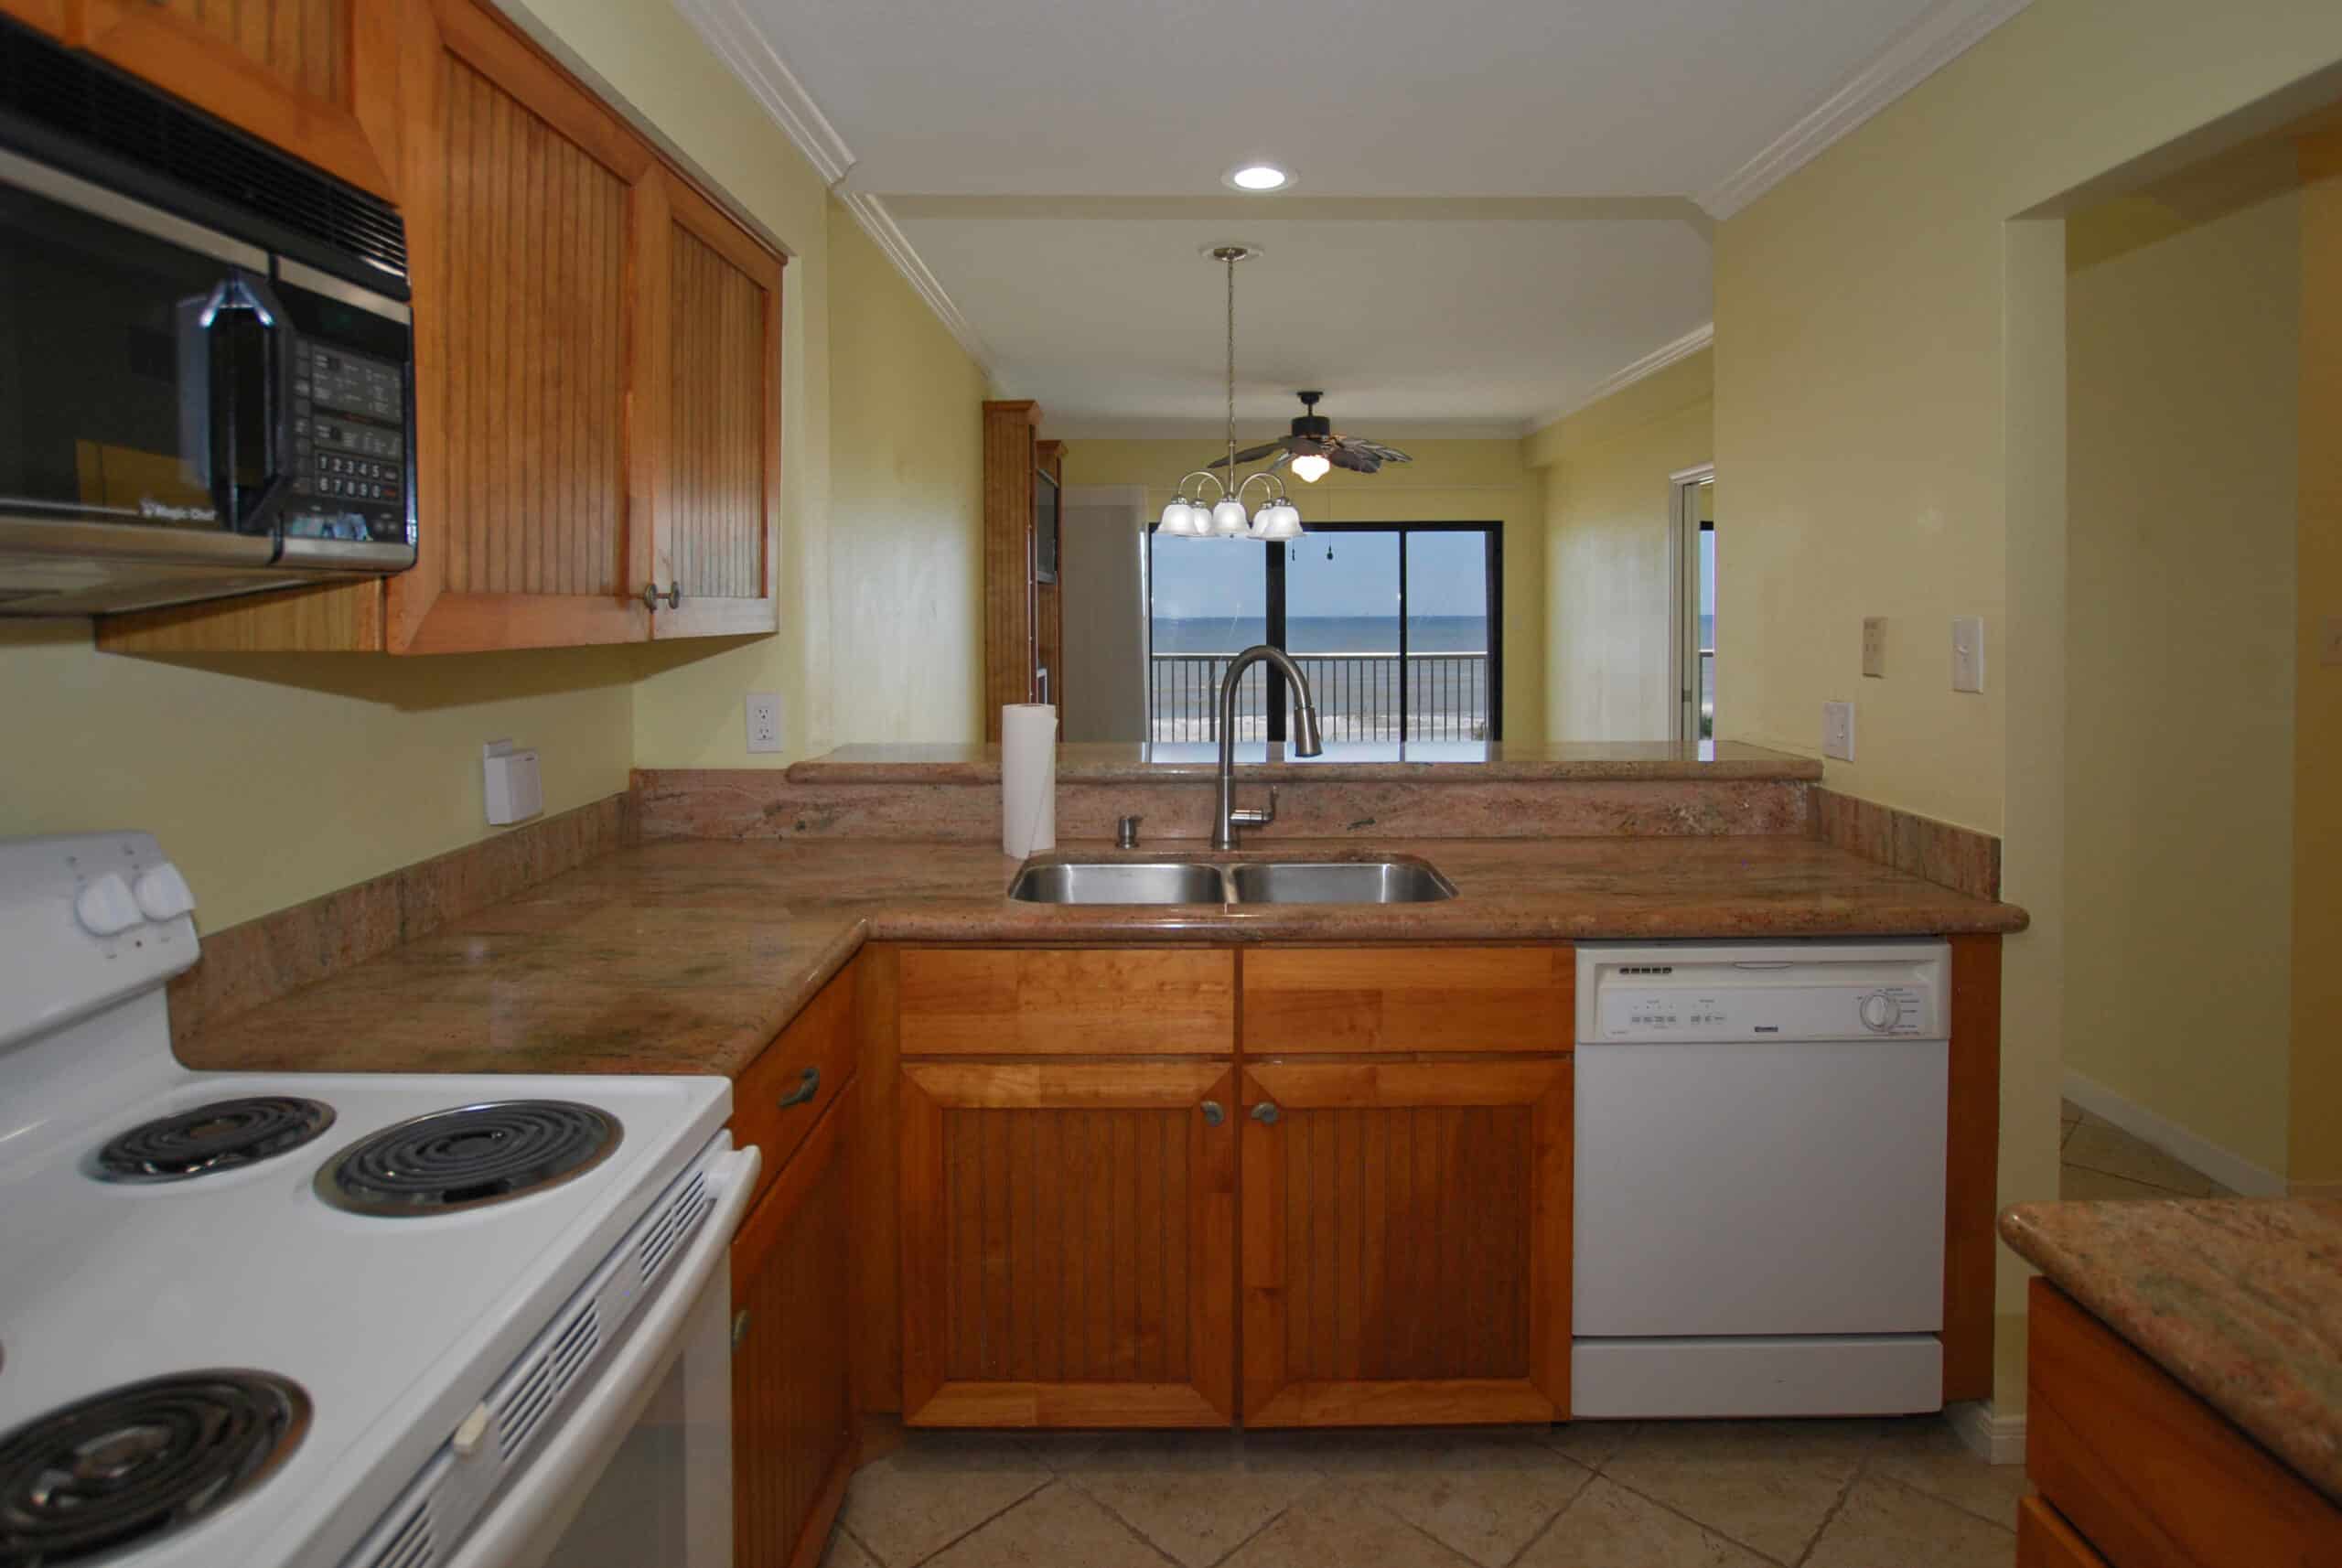 Photo of kitchen looking out toward living/dining room with view of Gulf.